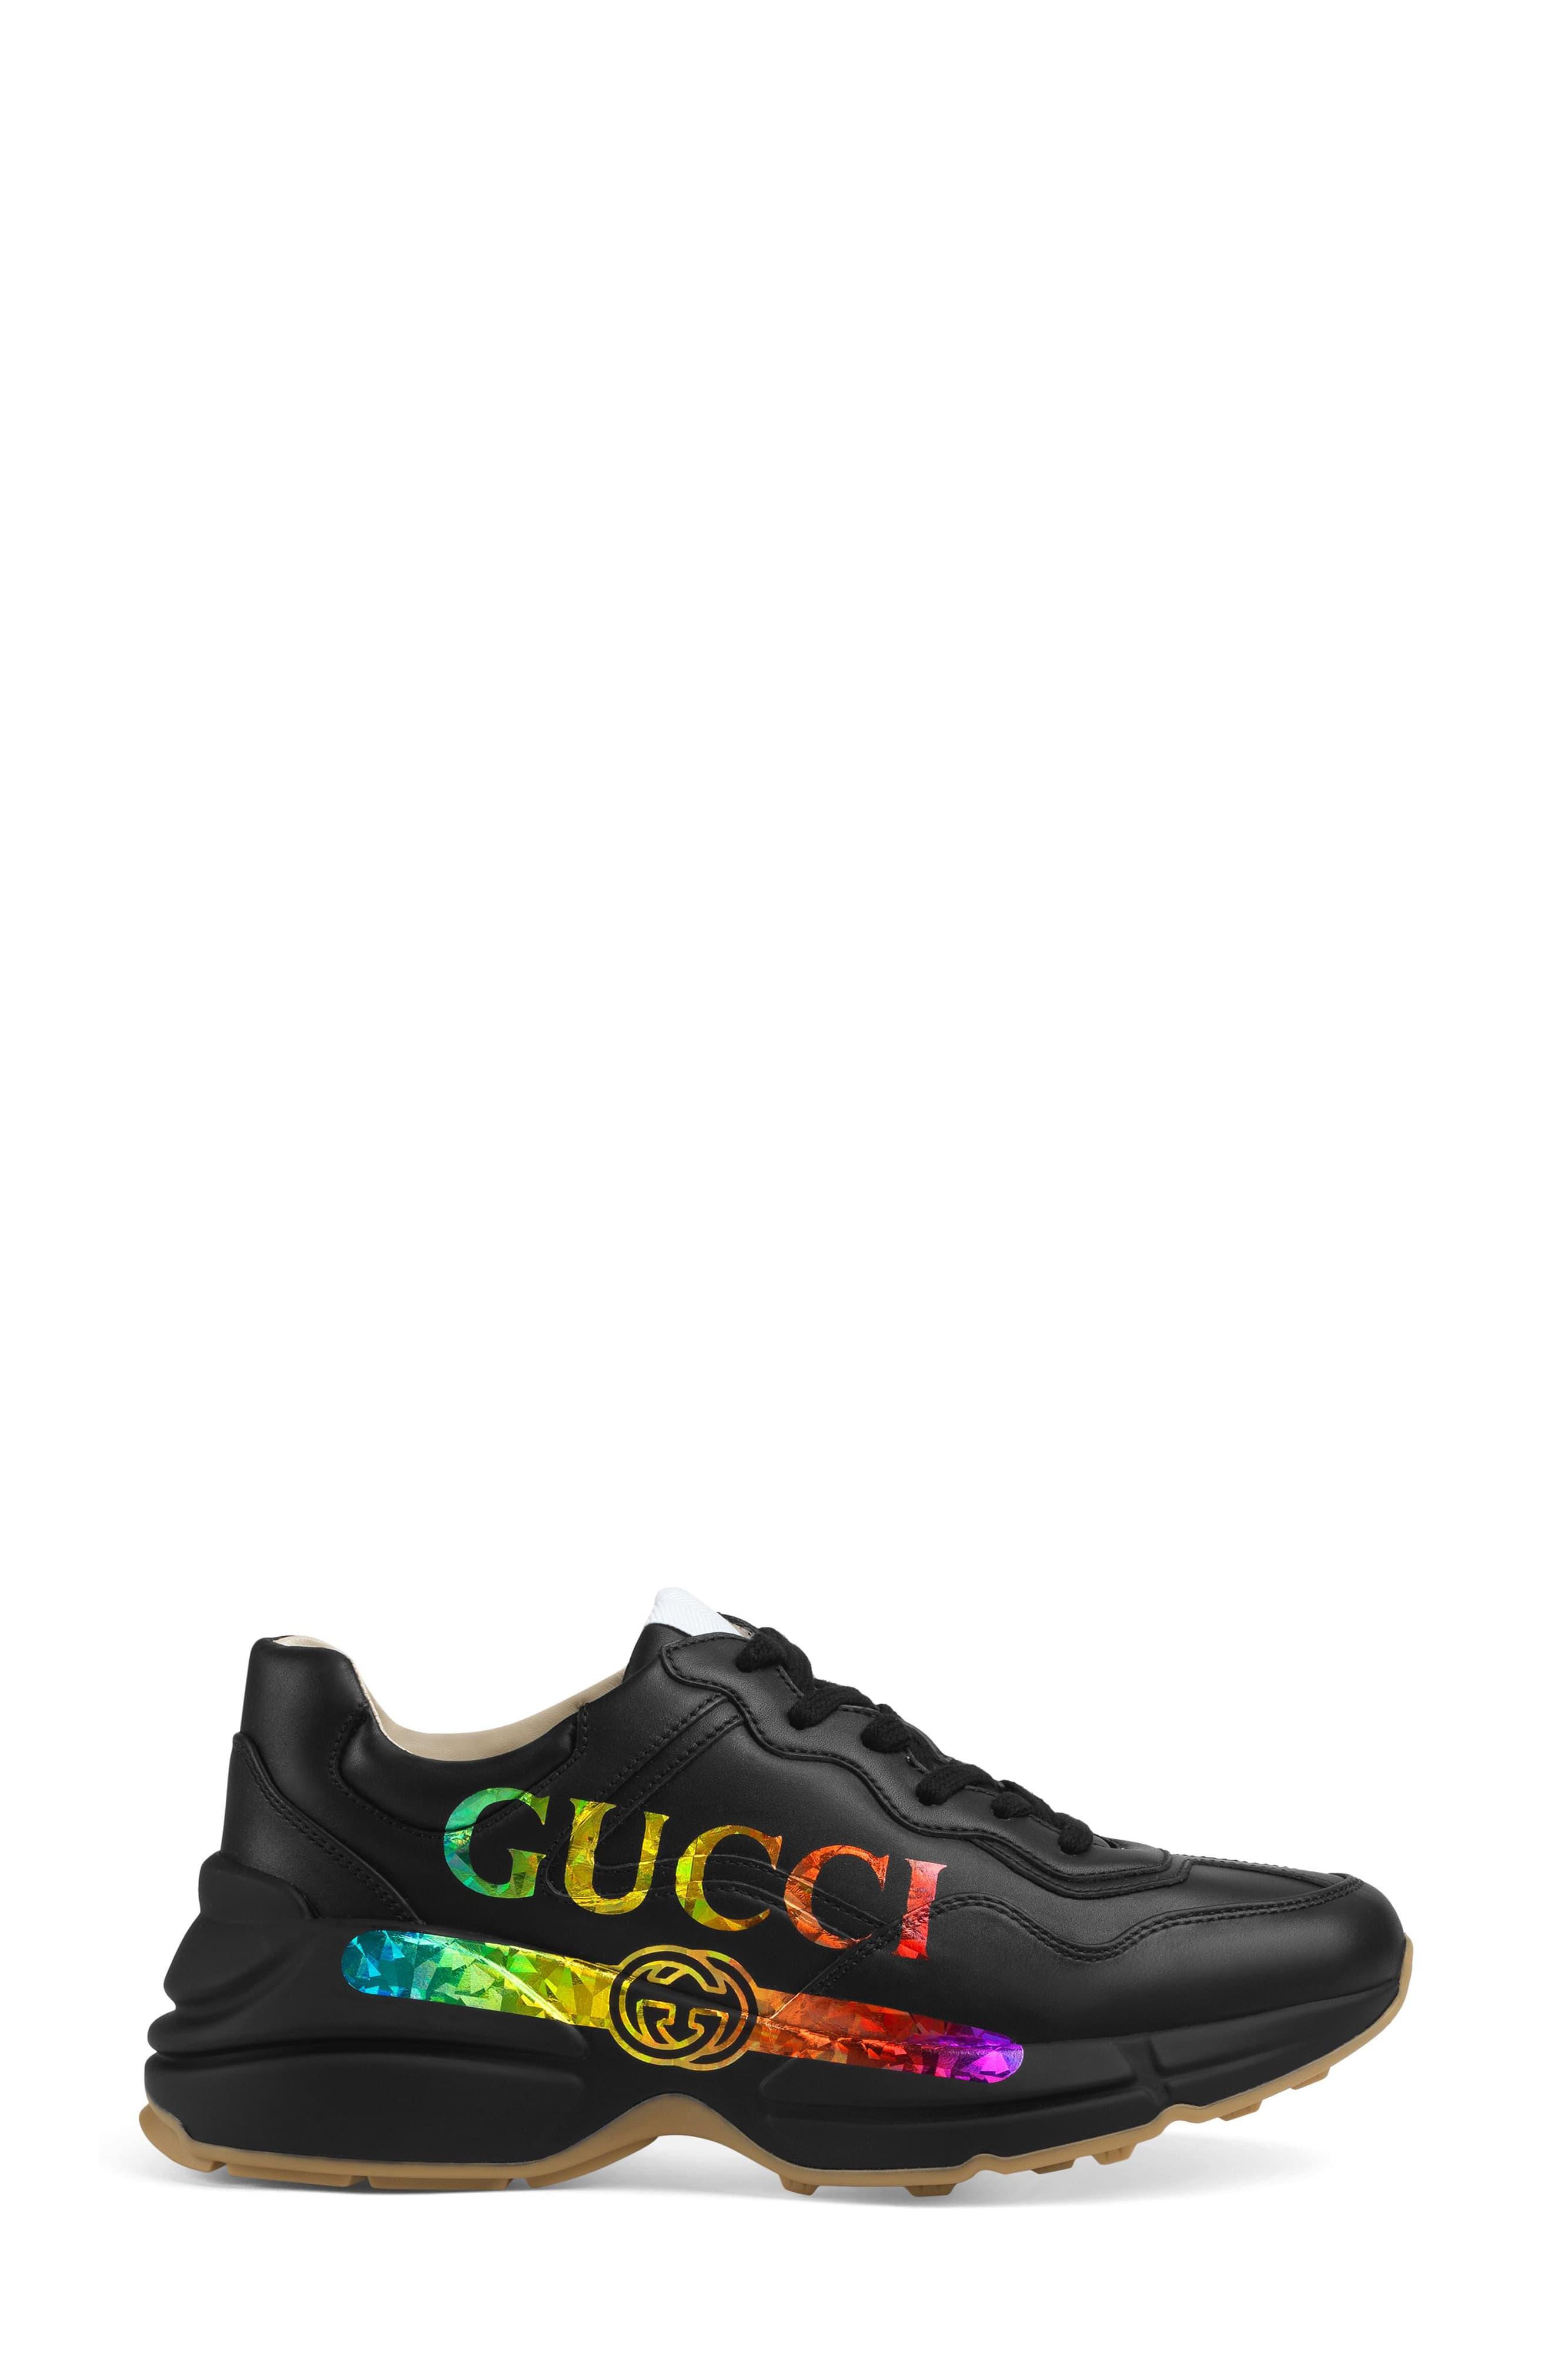 rainbow gucci shoes